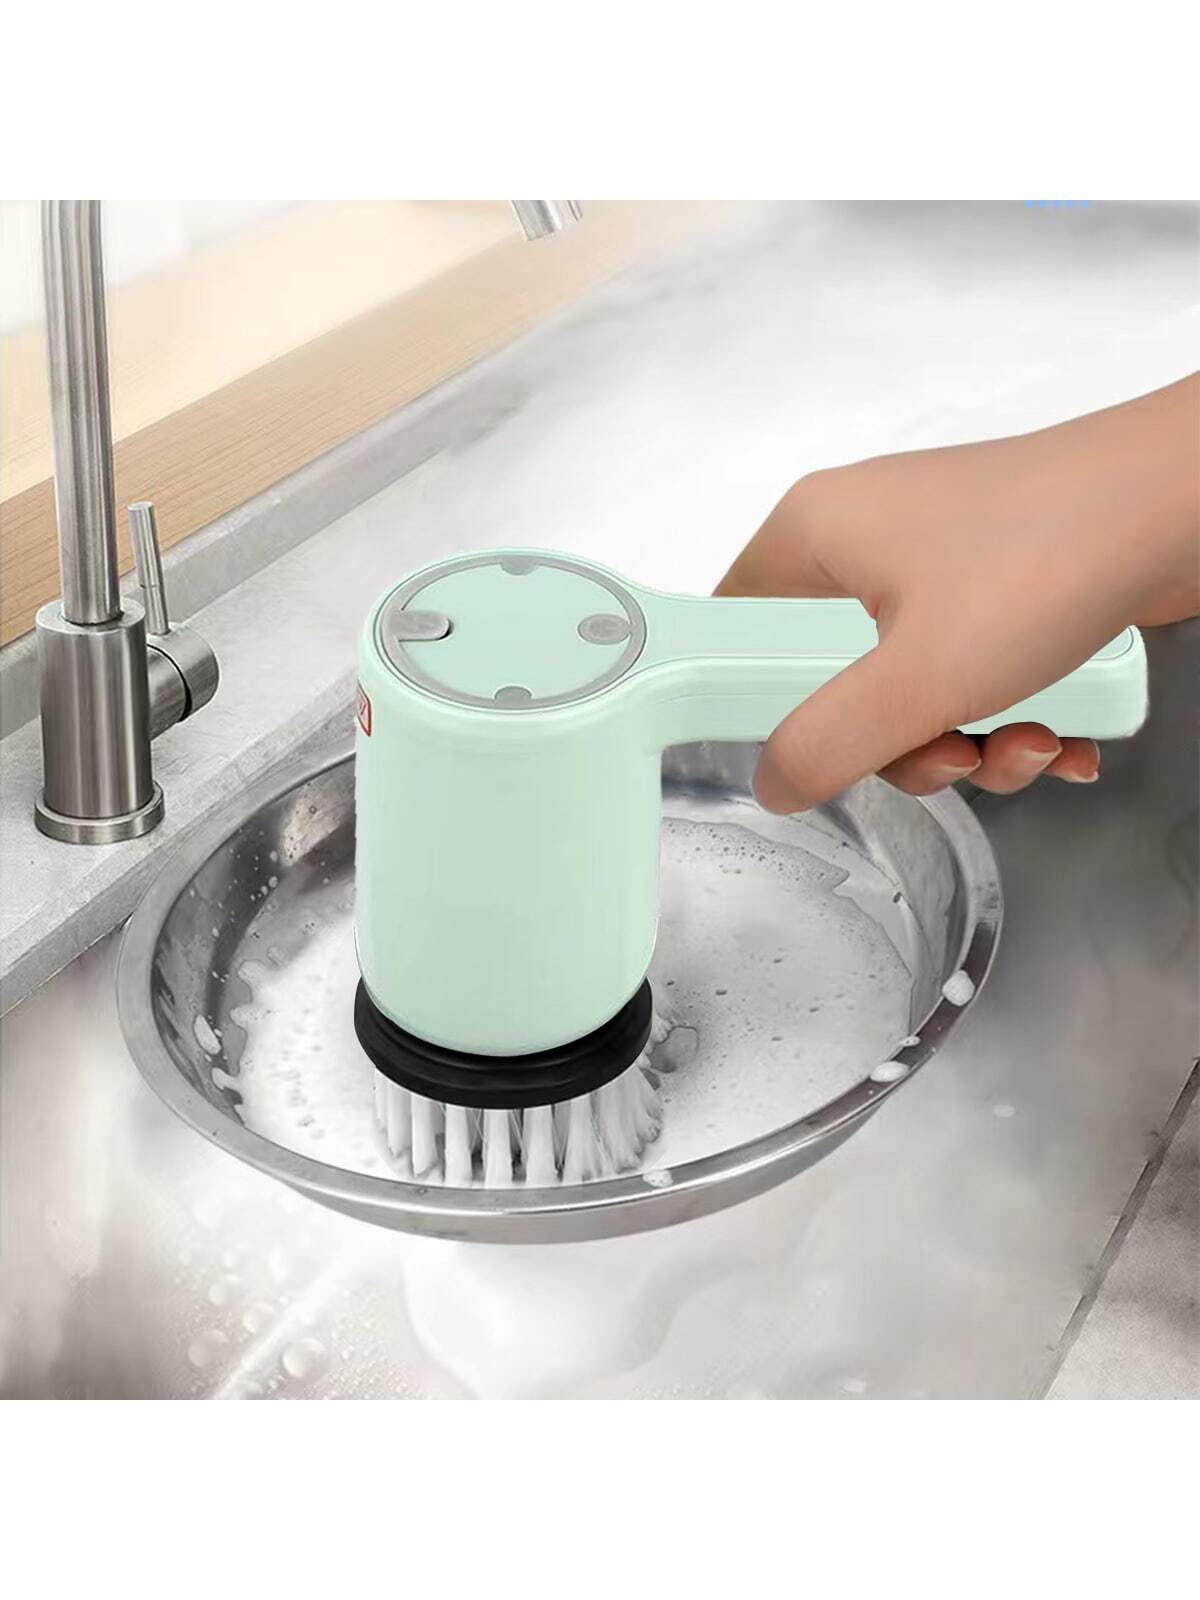 1200mAh Electric Rotary Cleaning Brush Wireless Kitchen